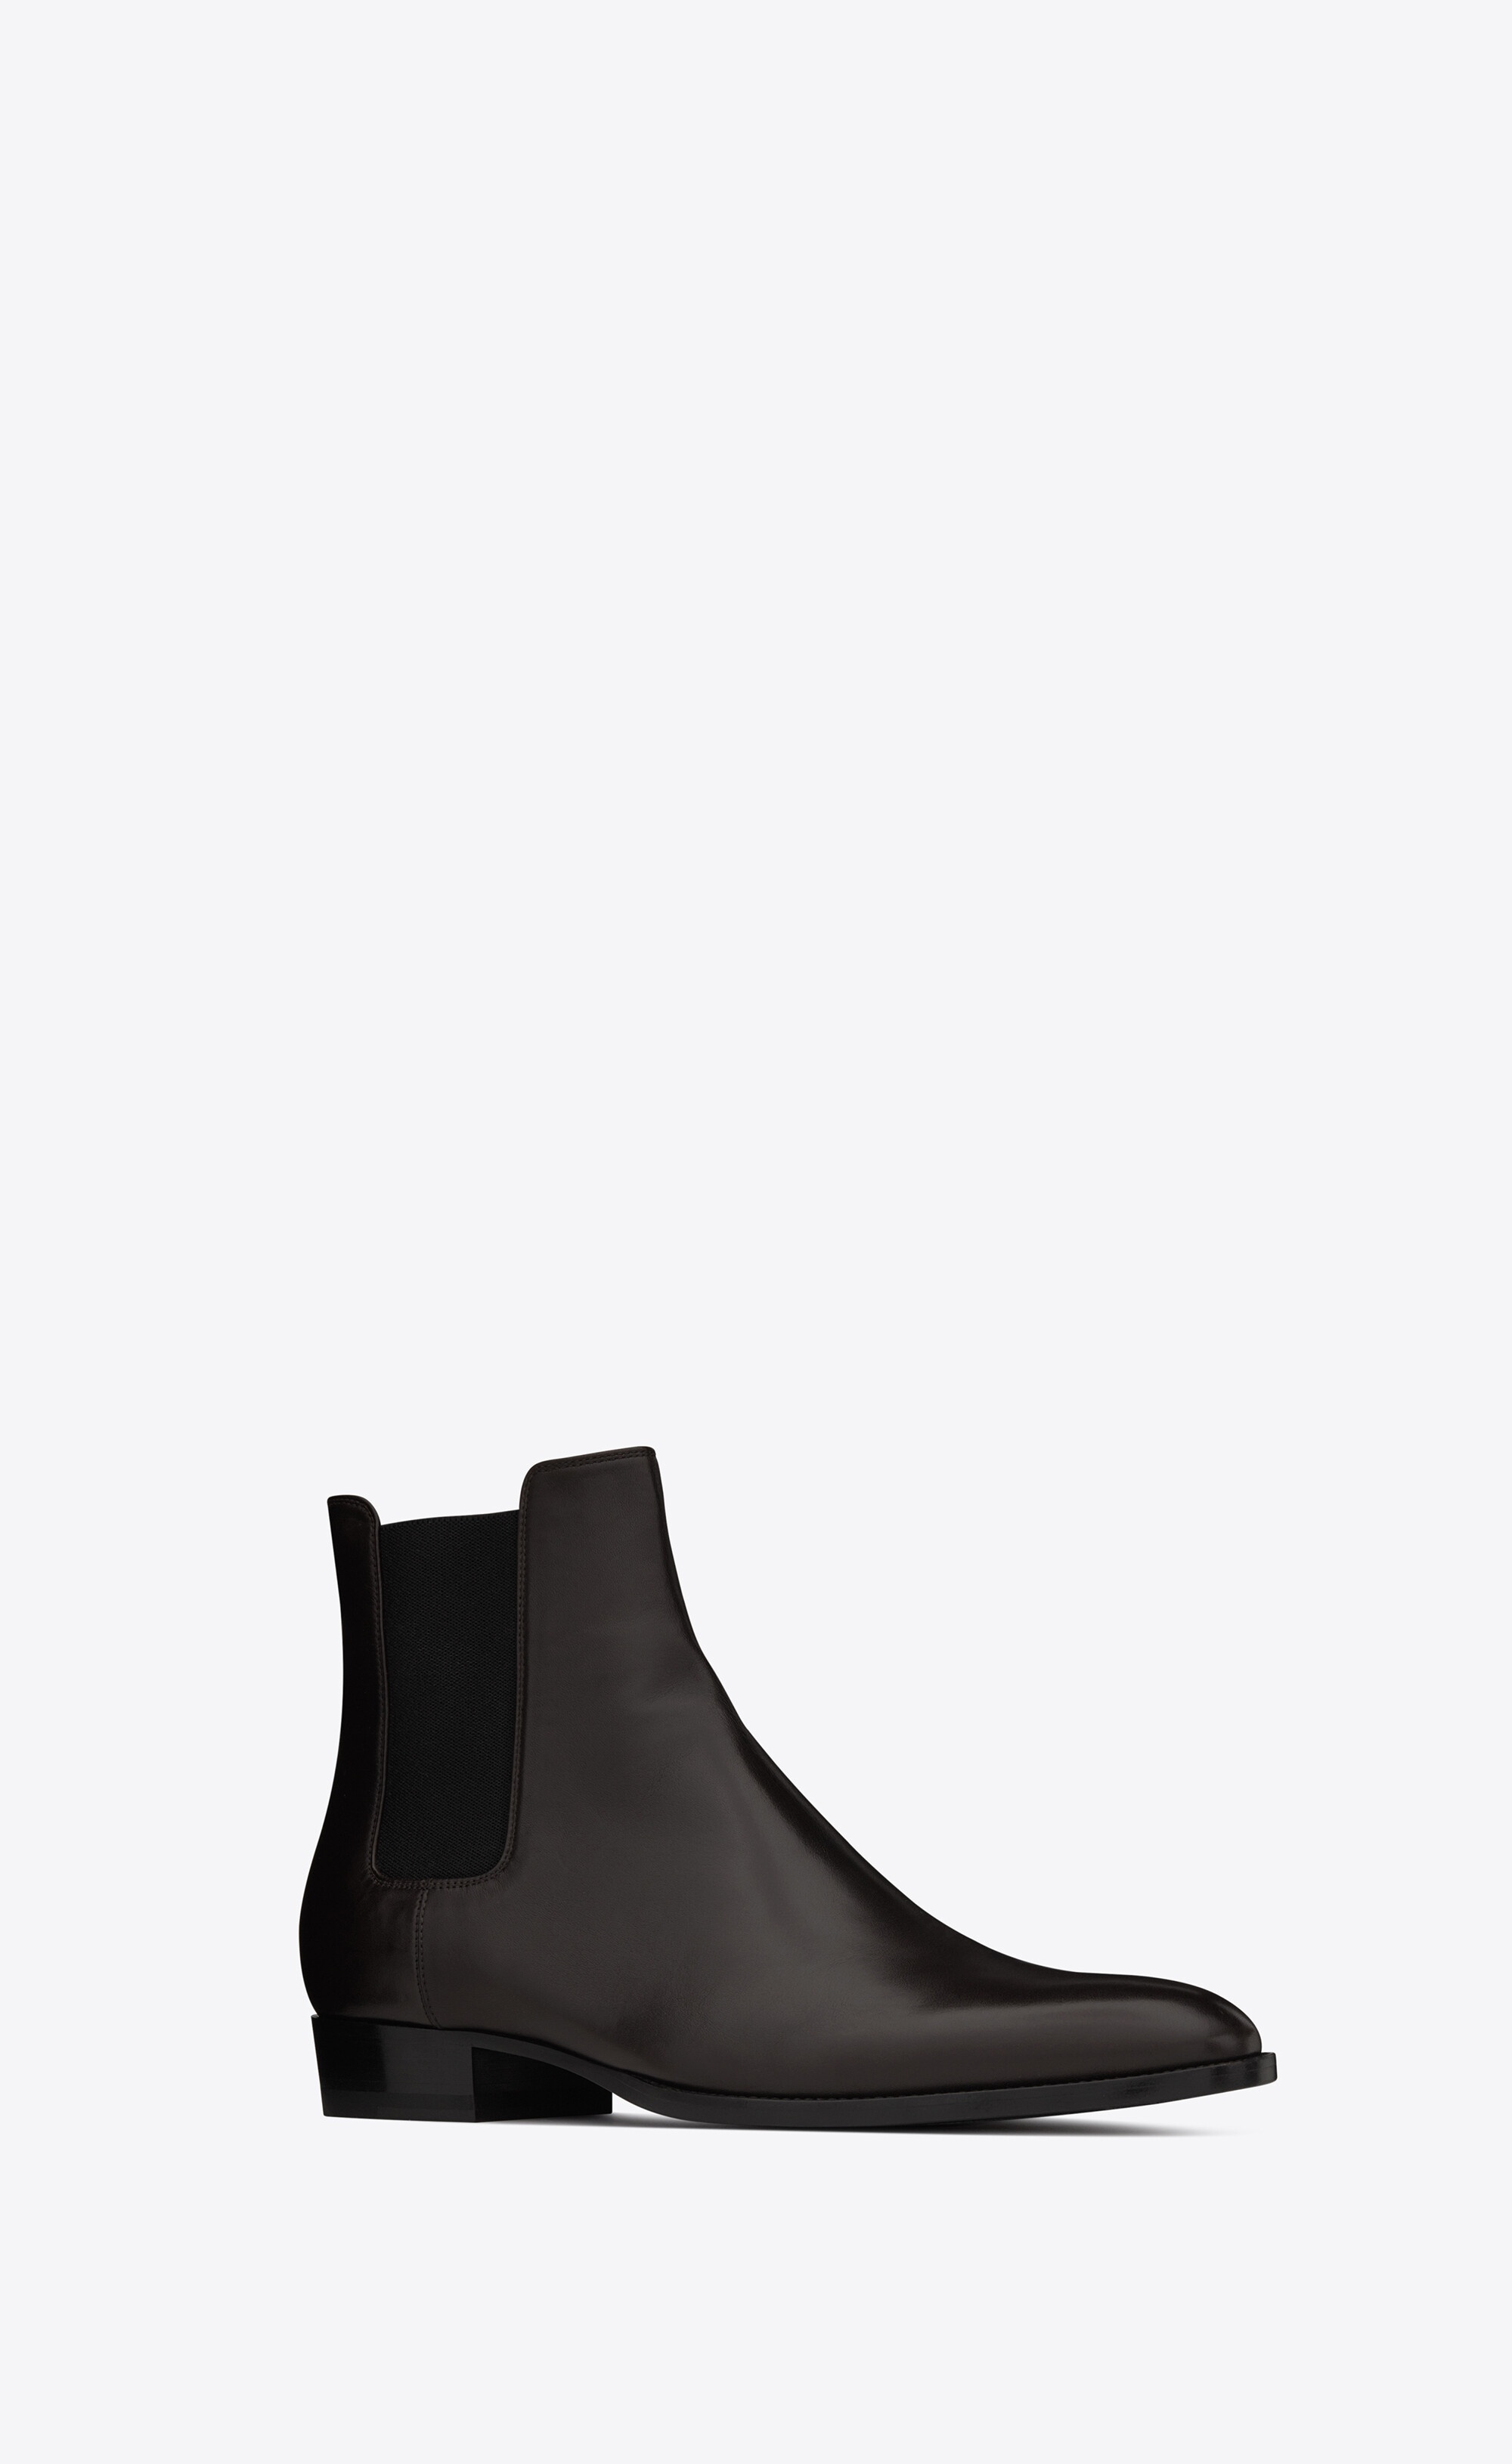 wyatt chelsea boots in smooth leather - 3